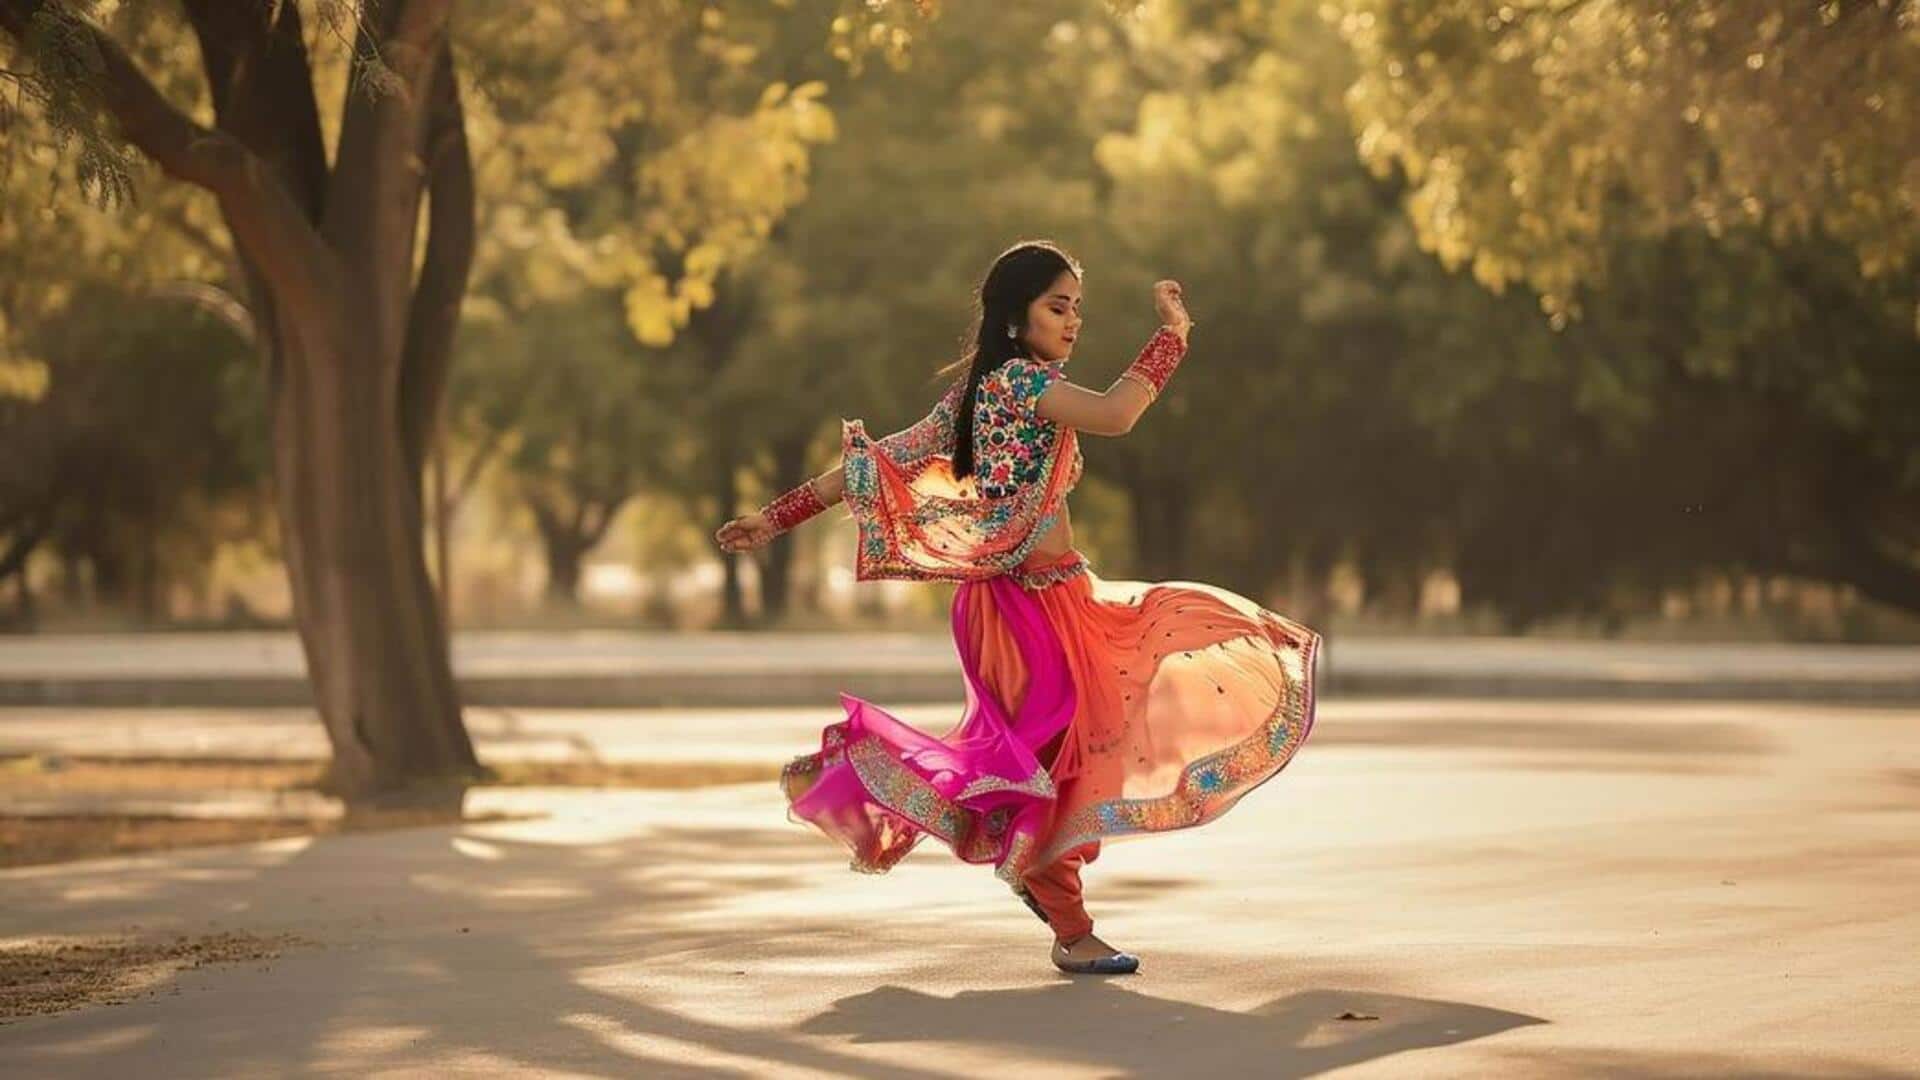 Reviving ghagra's charm: The traditional skirt is making a comeback